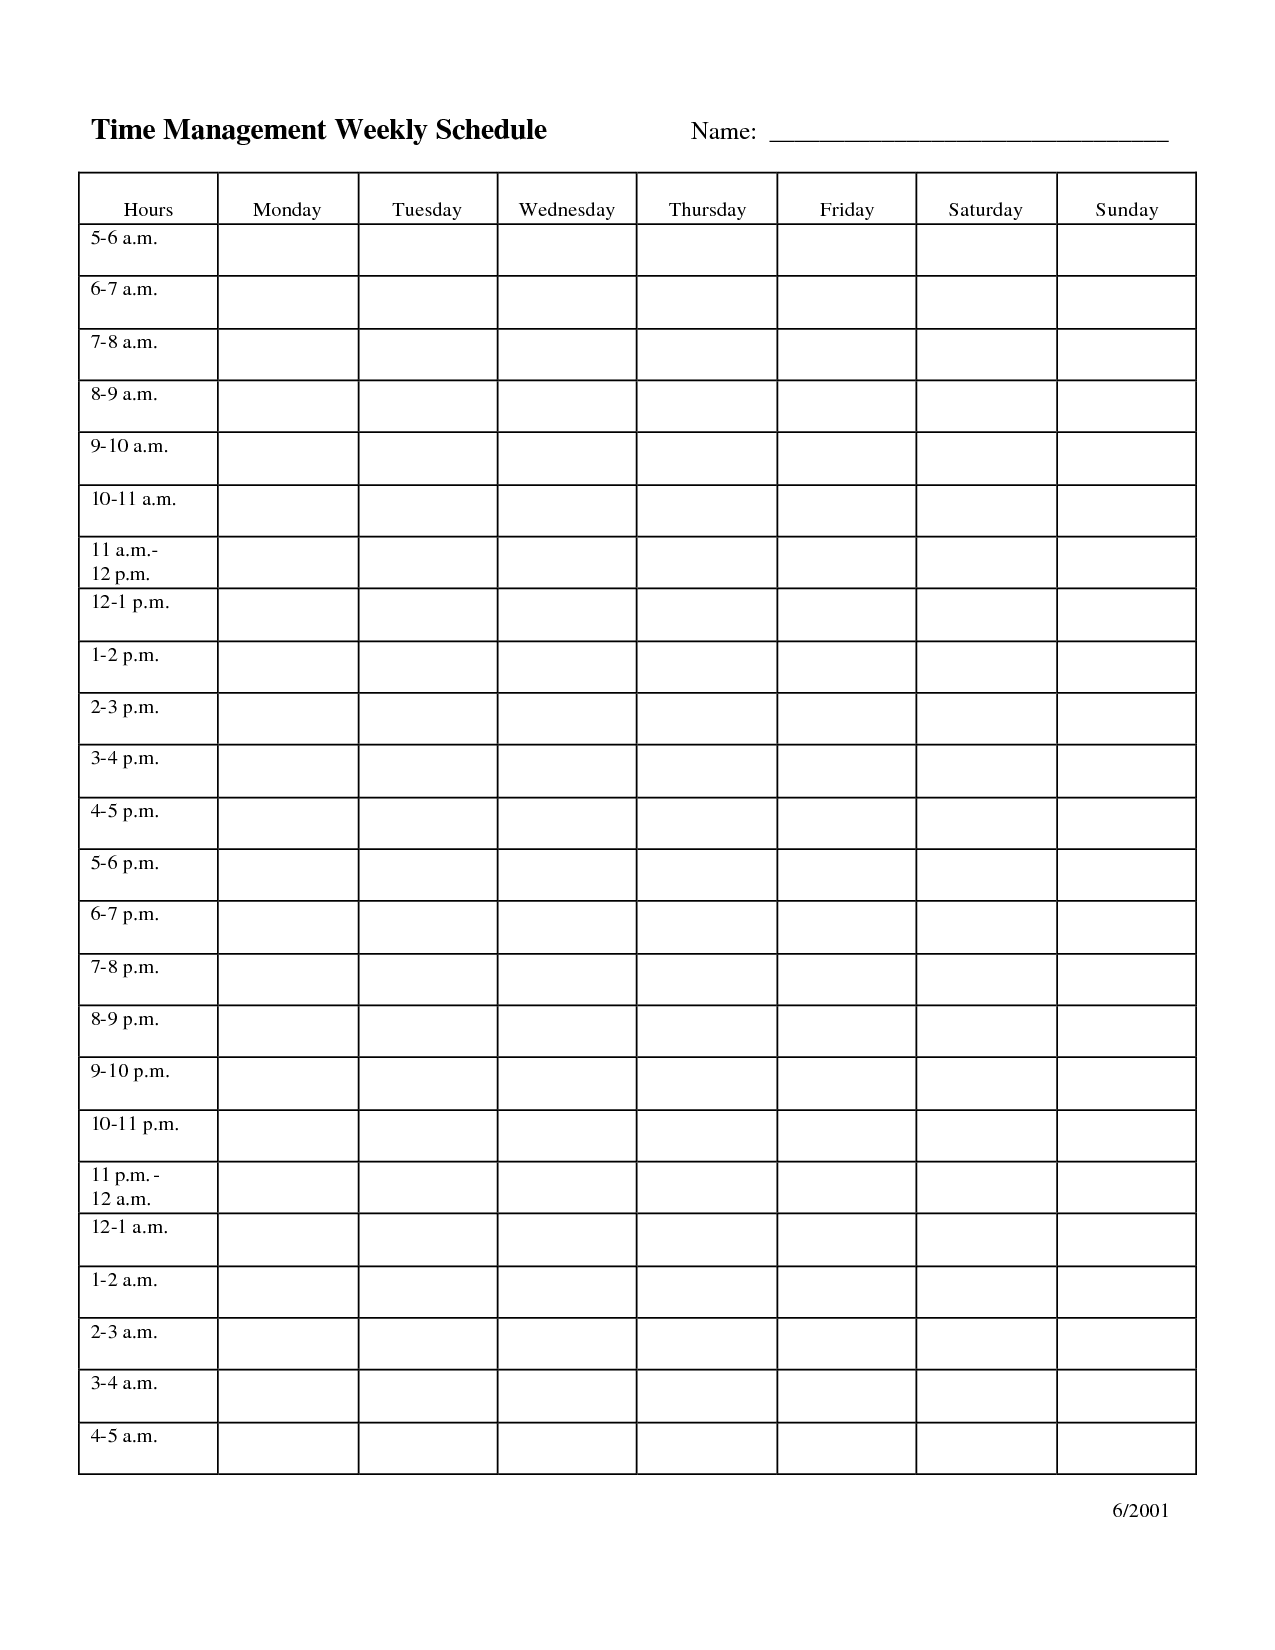 Time Management Weekly Schedule Template … | Bobbies wish list 